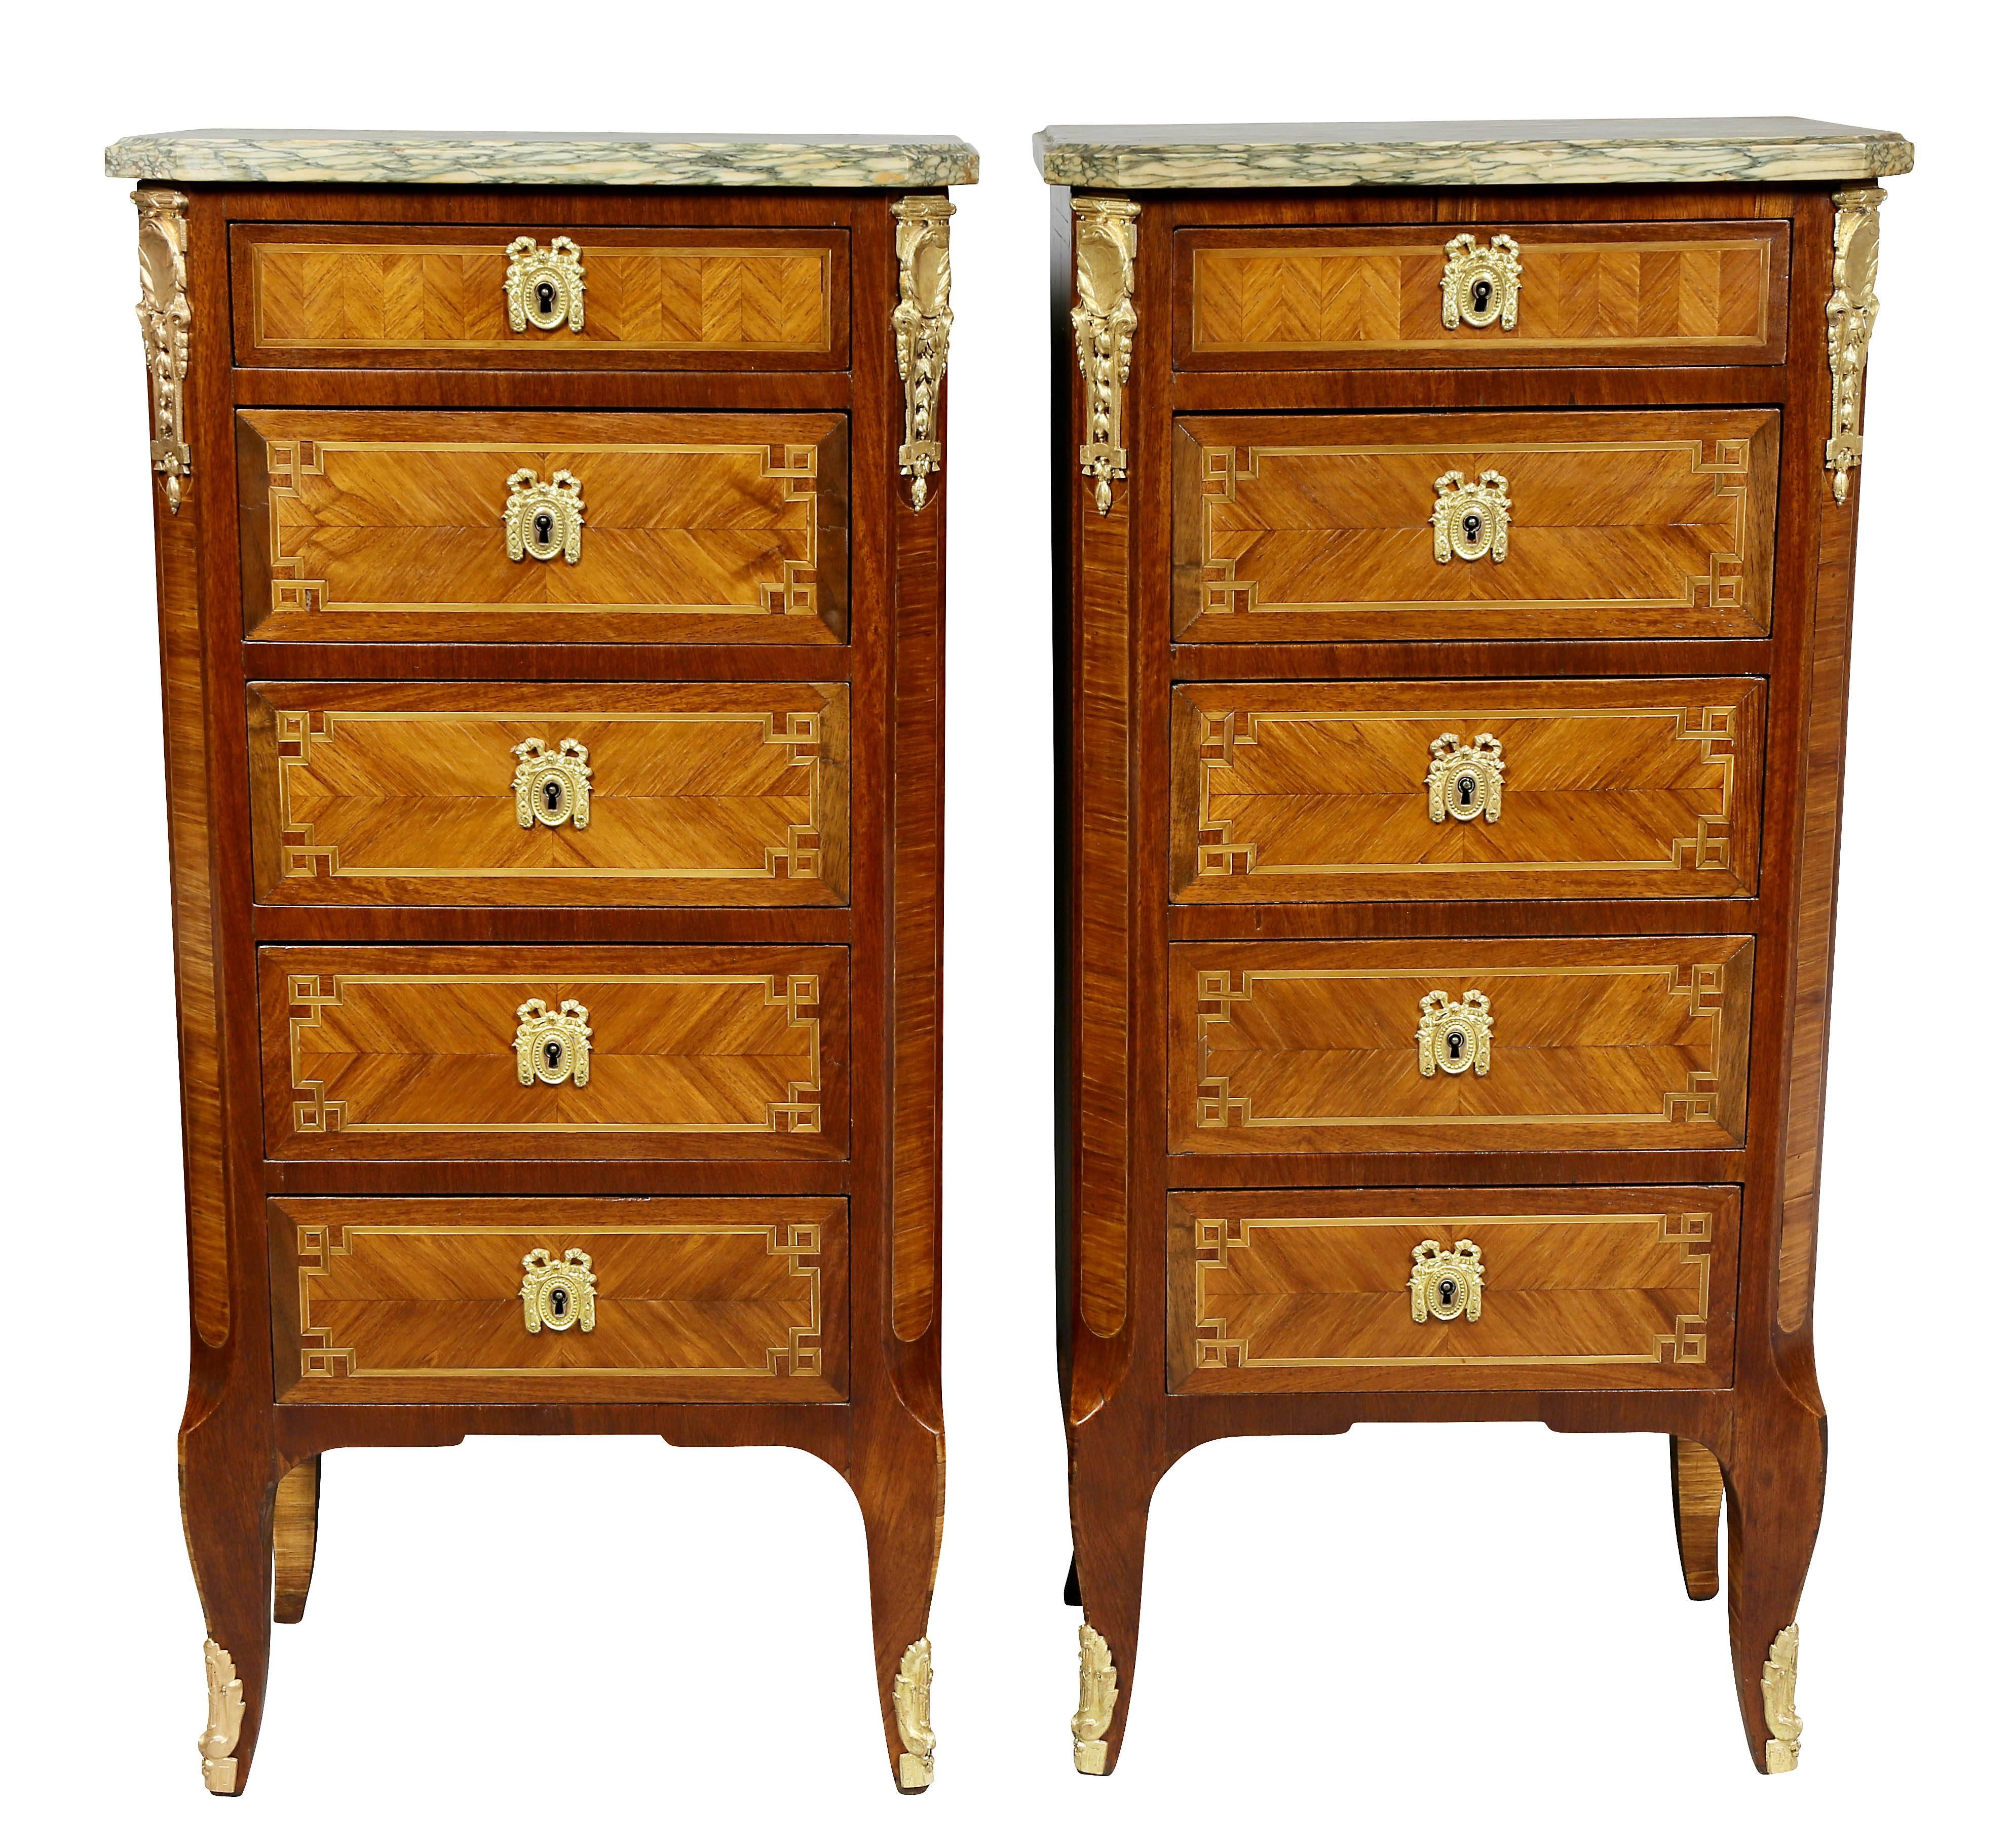 Each with green marble tops over five drawers.